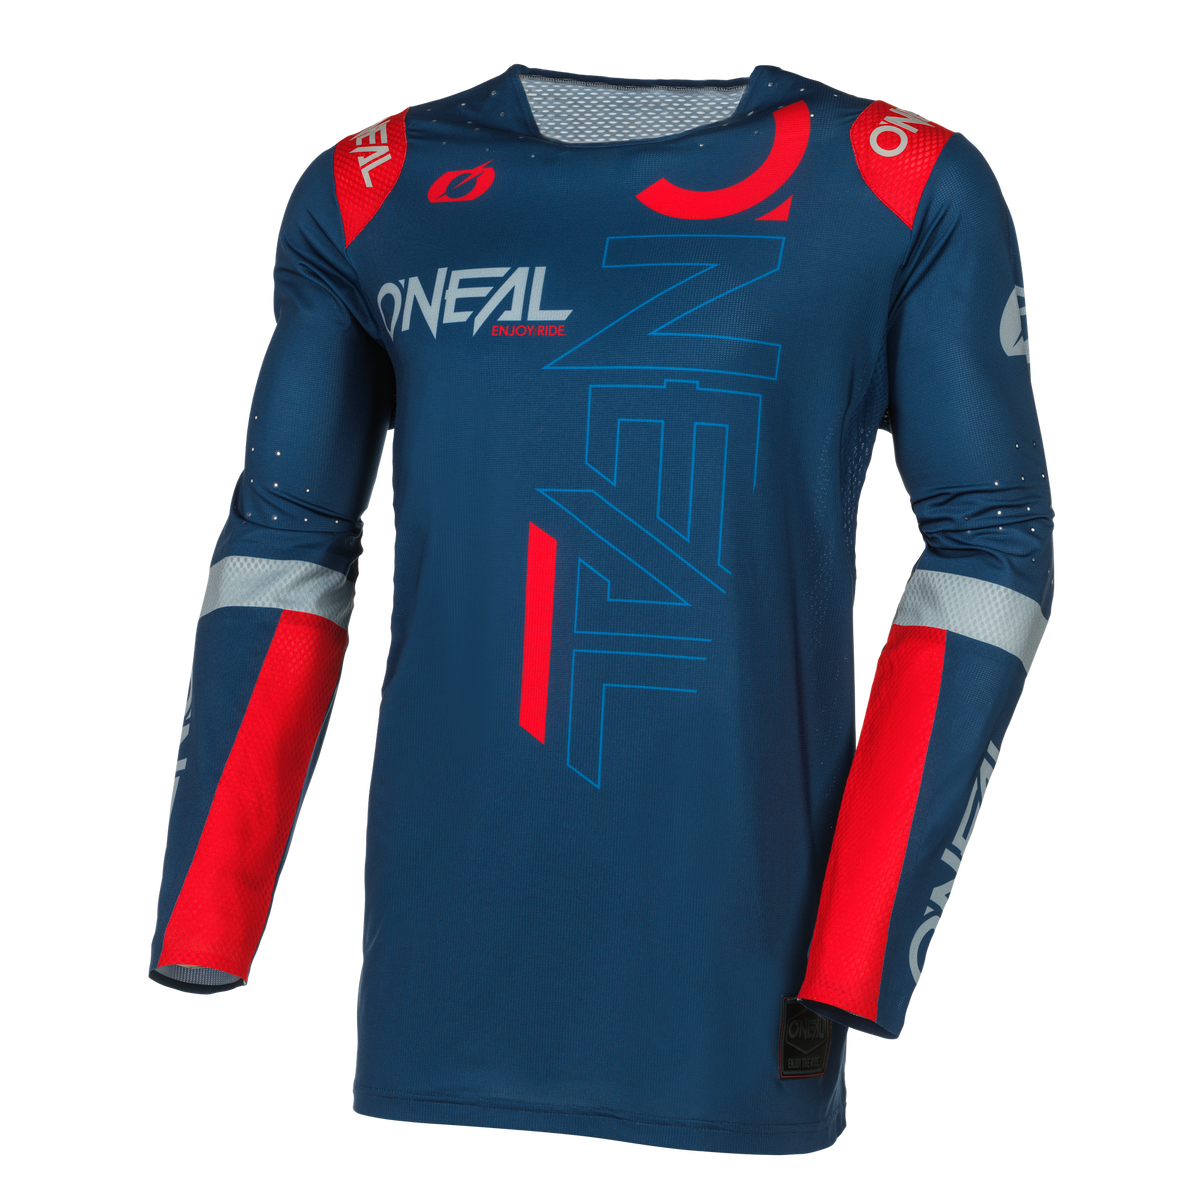 https://cdn.oneal.eu/assets/_default_upload_bucket/2024_ONeal_PRODIGY%20Jersey%20FIVE%20THREE%20V.24_blue_red_front_1.png